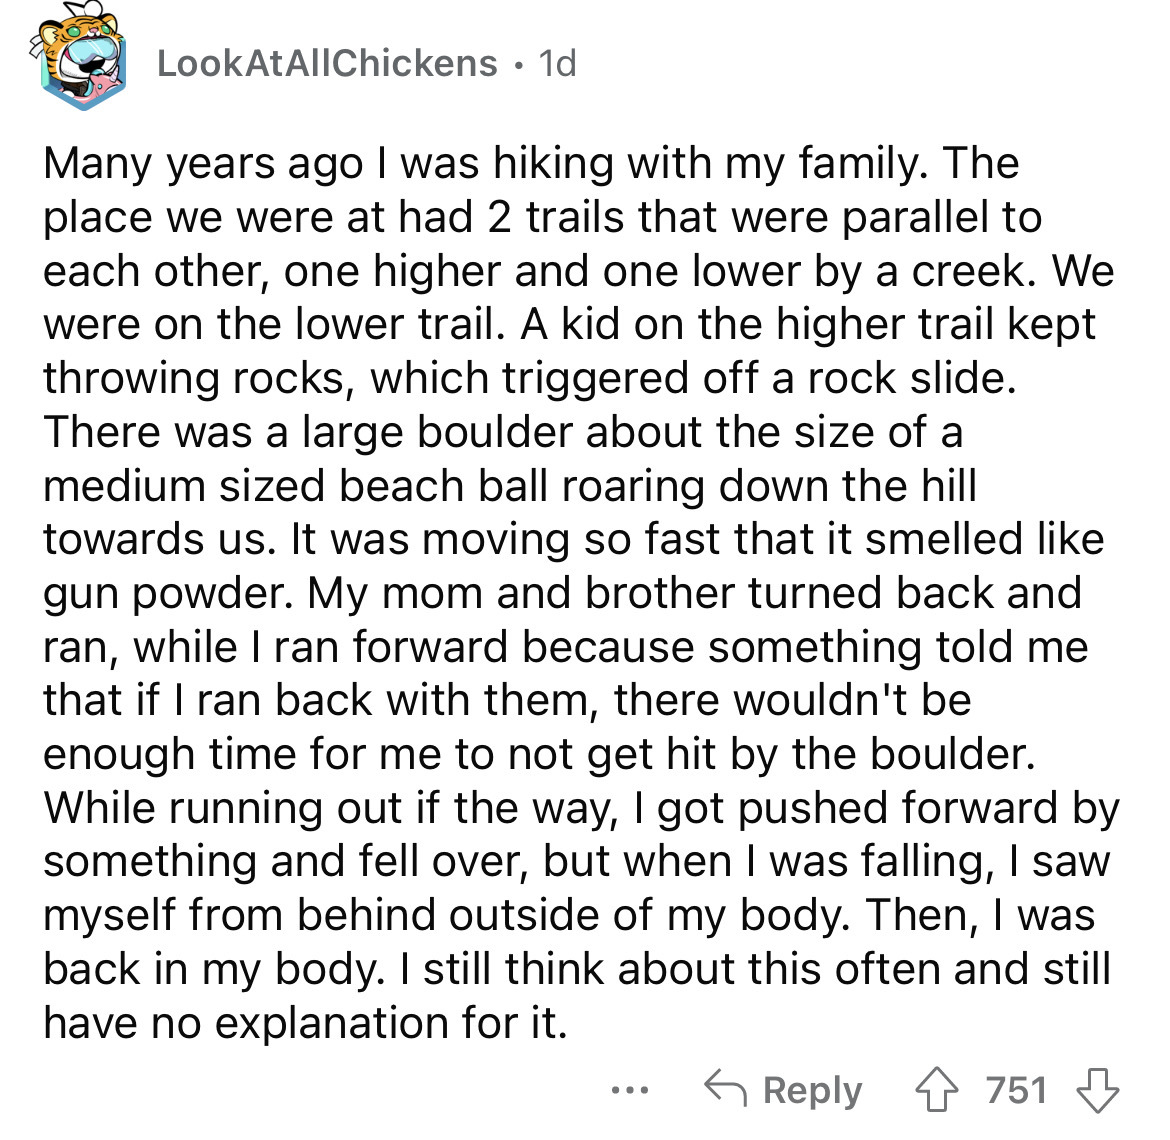 document - LookAtAllChickens. 1d Many years ago I was hiking with my family. The place we were at had 2 trails that were parallel to each other, one higher and one lower by a creek. We were on the lower trail. A kid on the higher trail kept throwing rocks